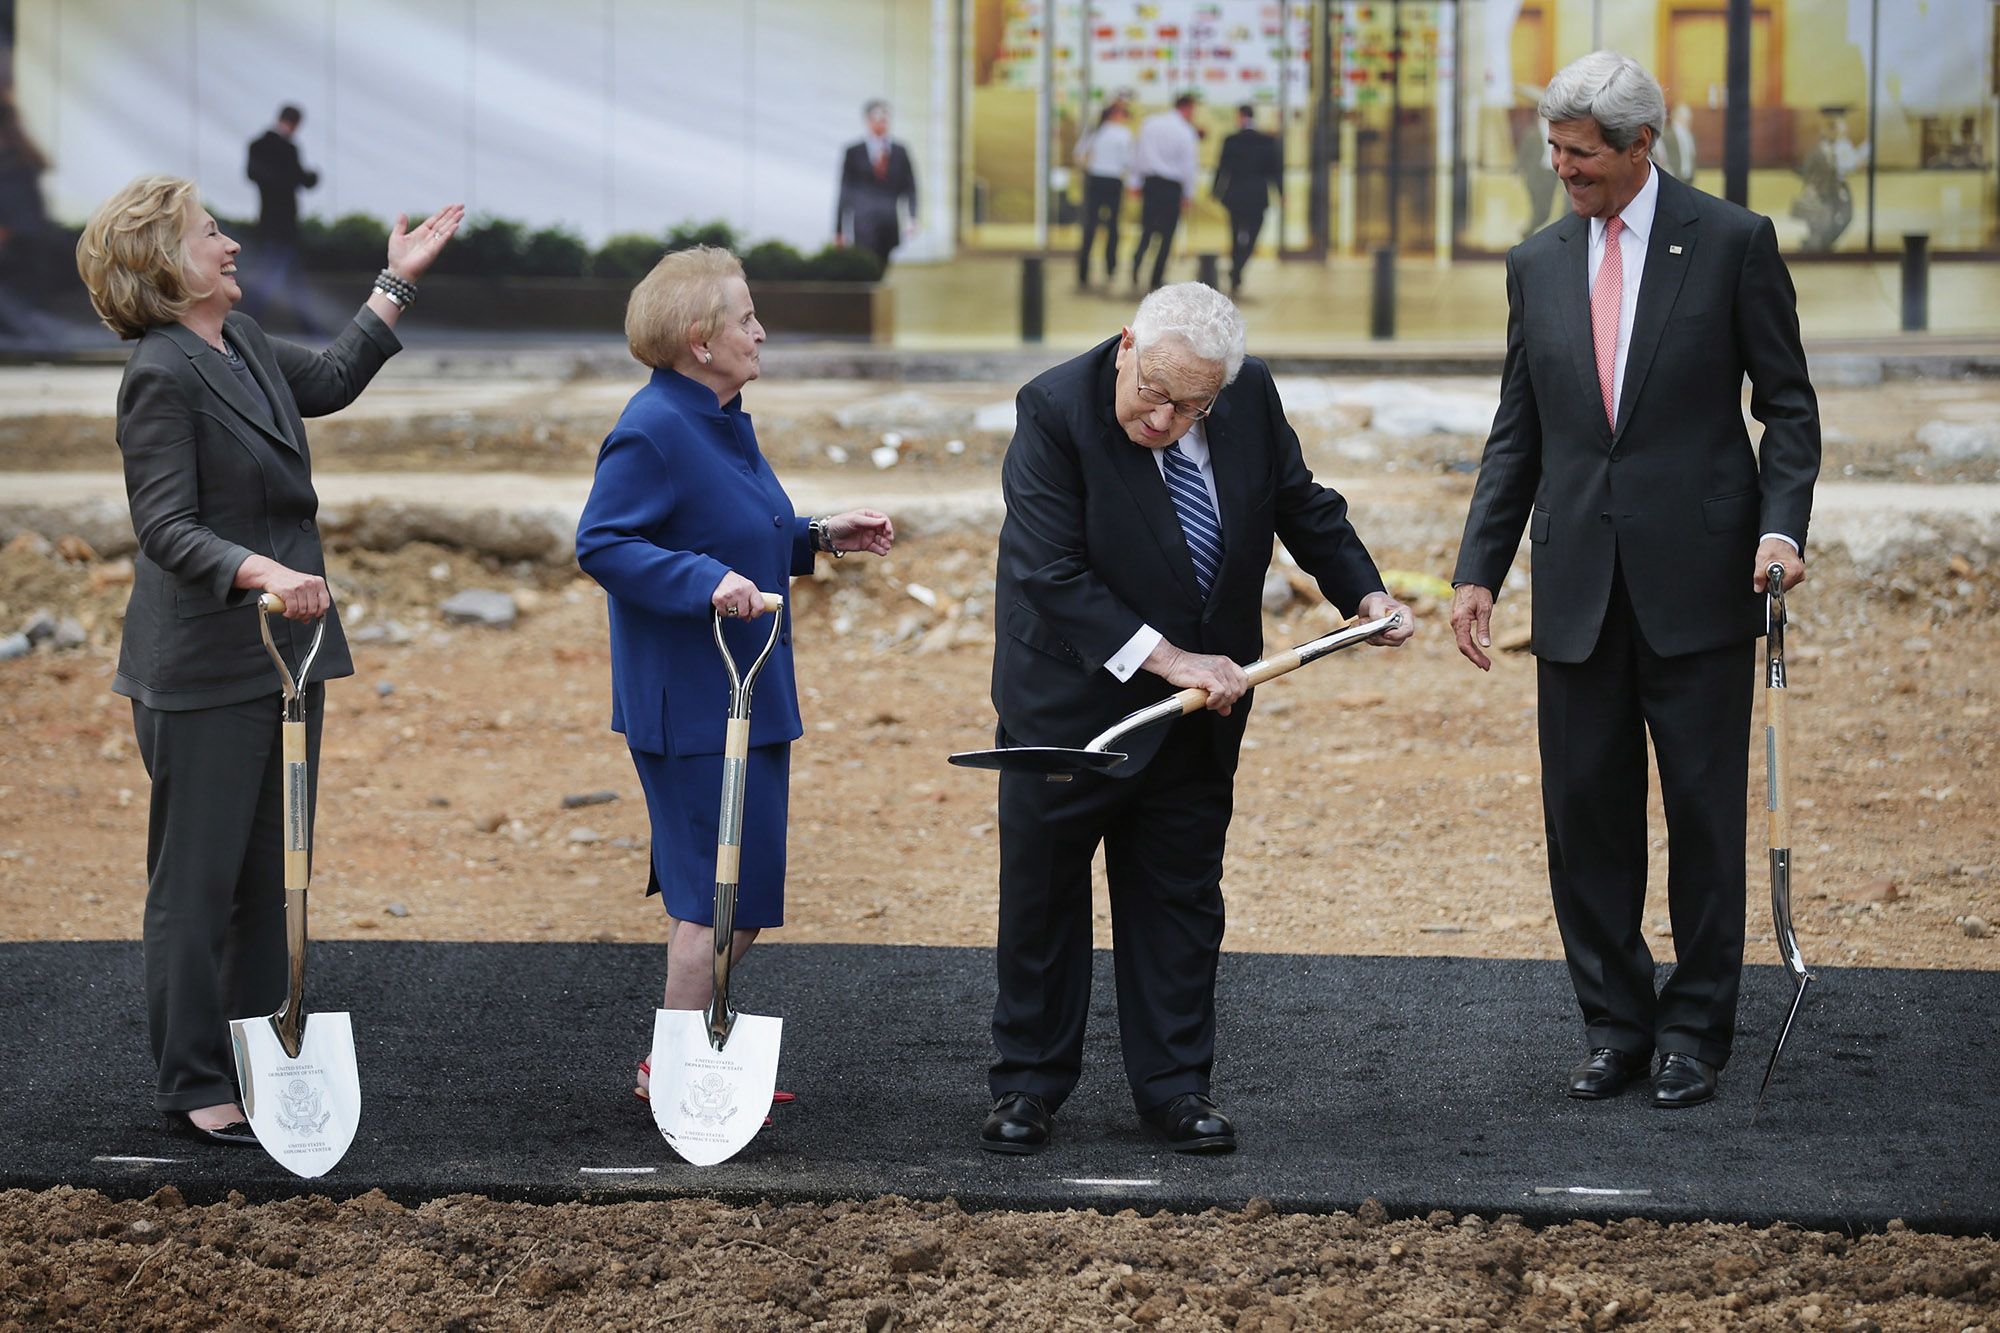 From left, former Secretaries of State Hillary Clinton, Madeleine Albright and Kissinger join Secretary of State John Kerry for the ceremonial groundbreaking of the US Diplomacy Center in 2014.